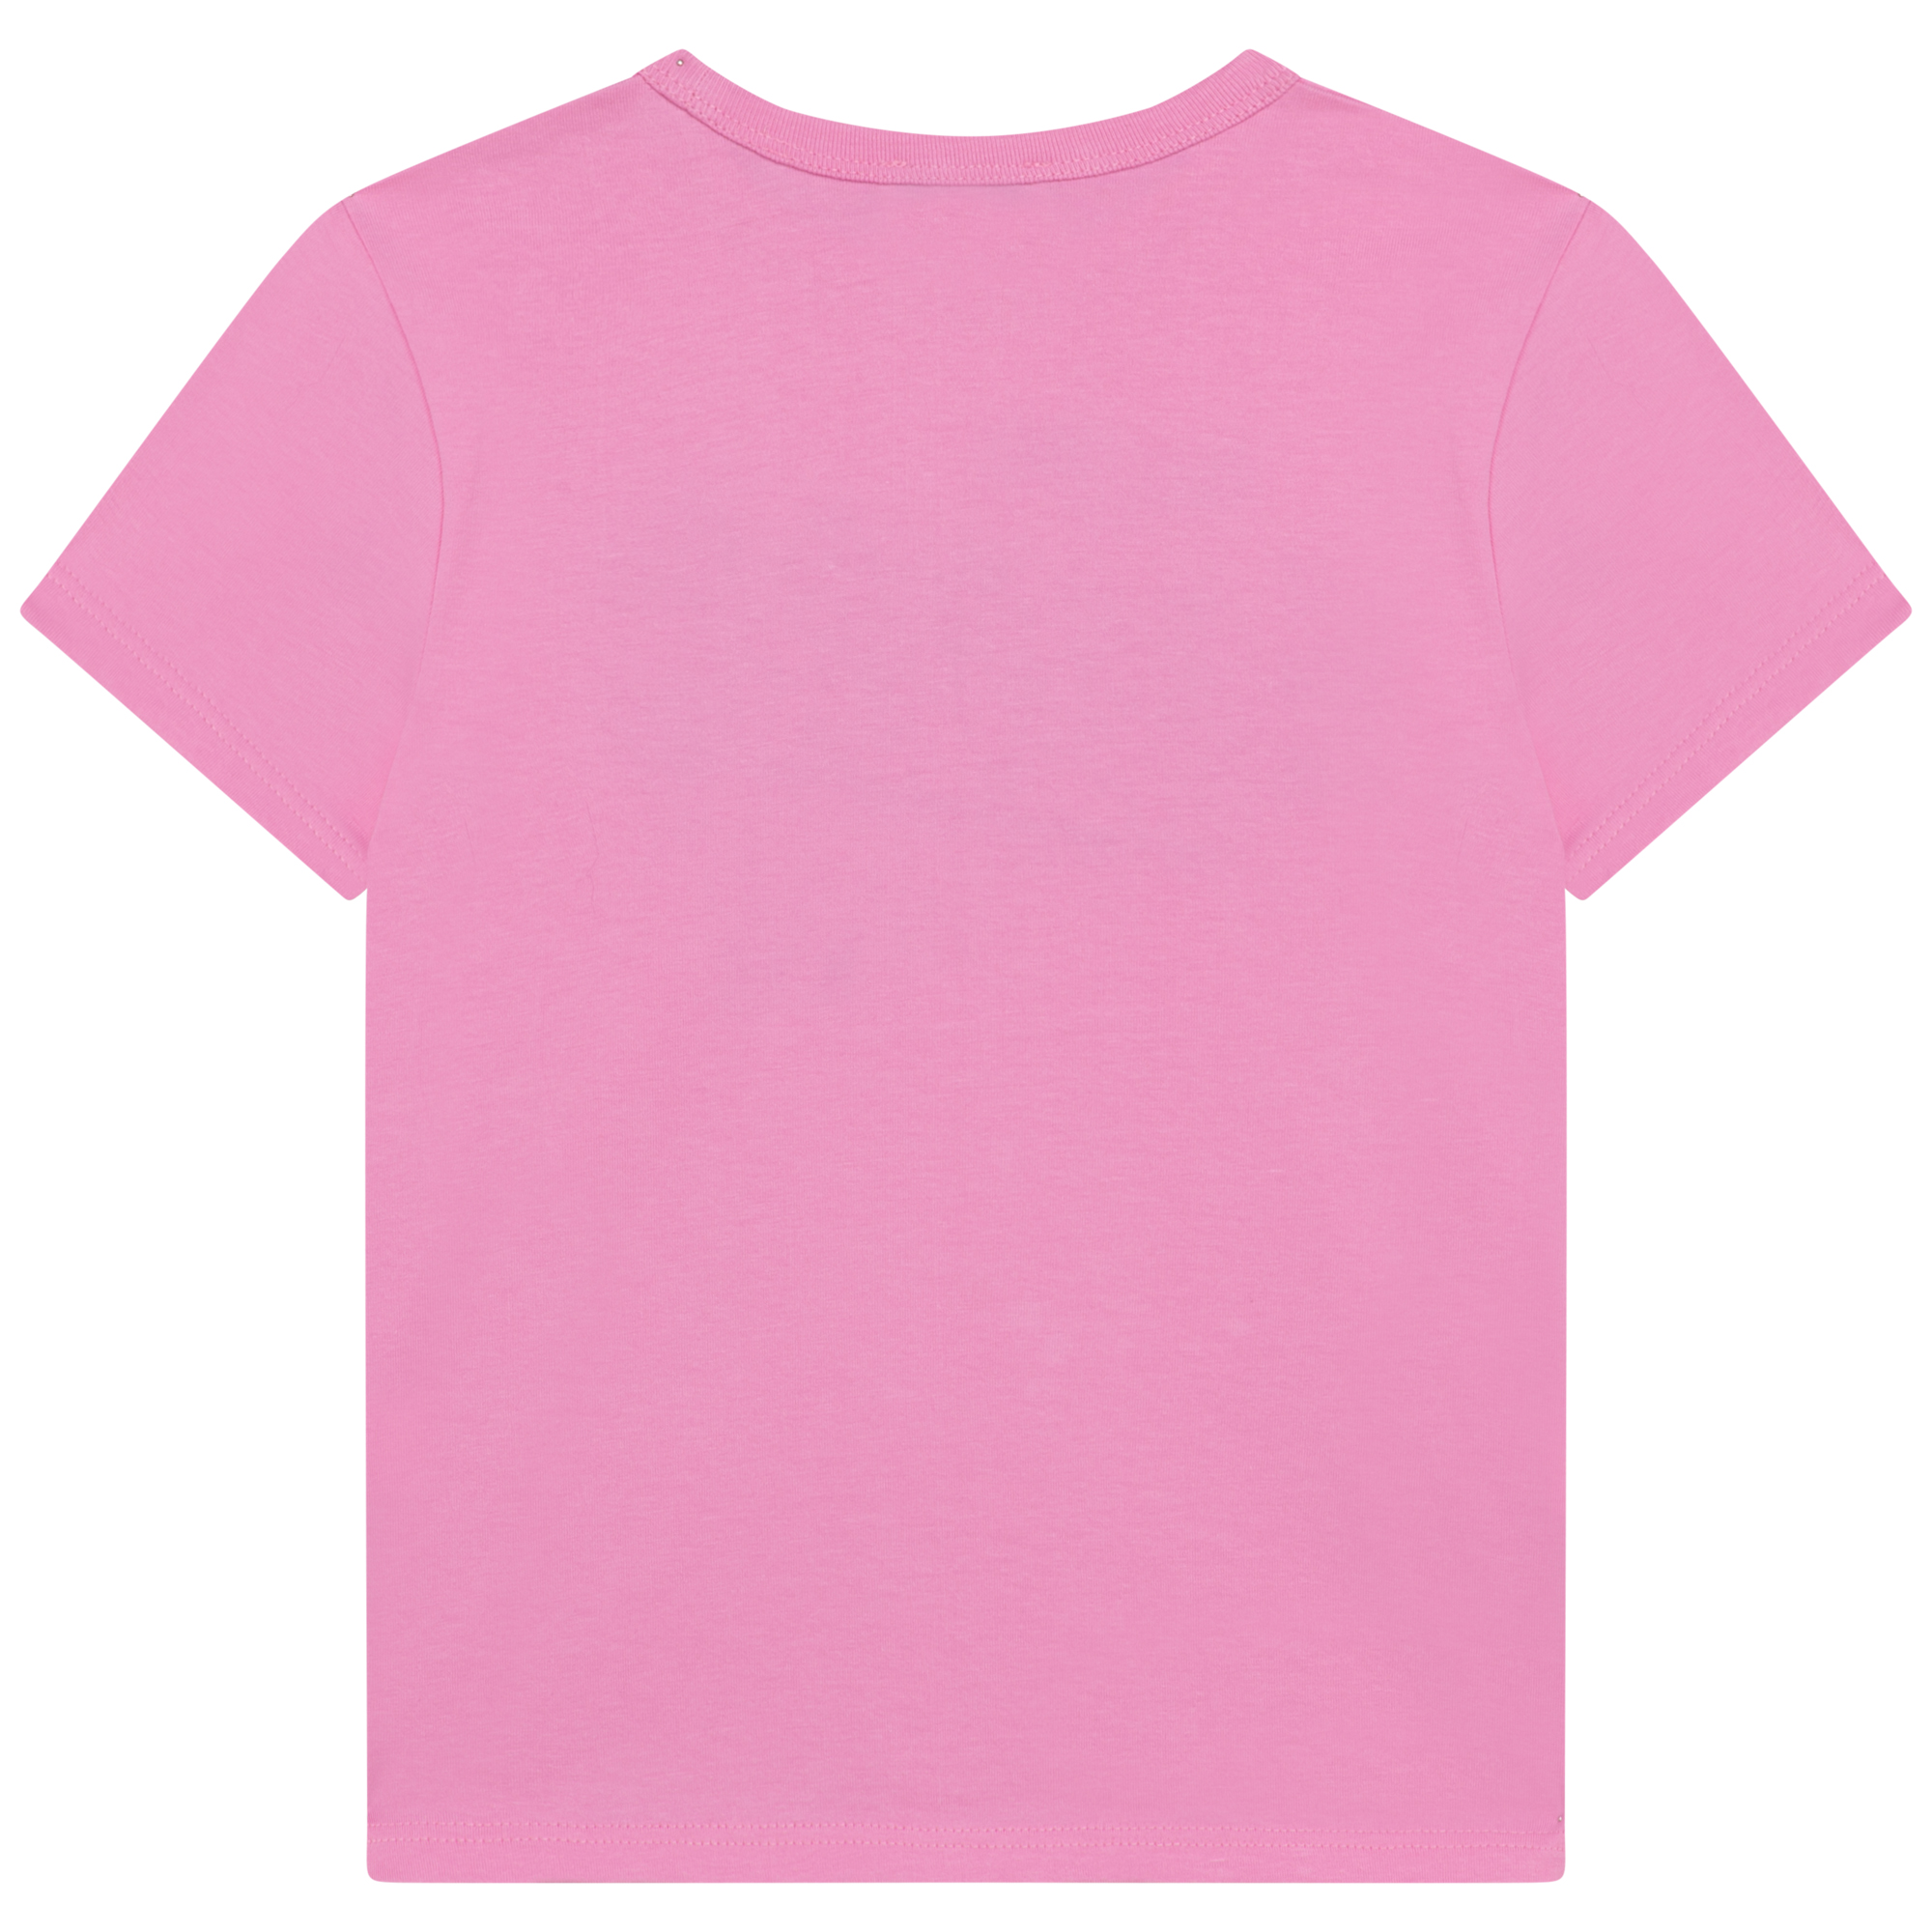 Organic cotton T-shirt MARC JACOBS for GIRL